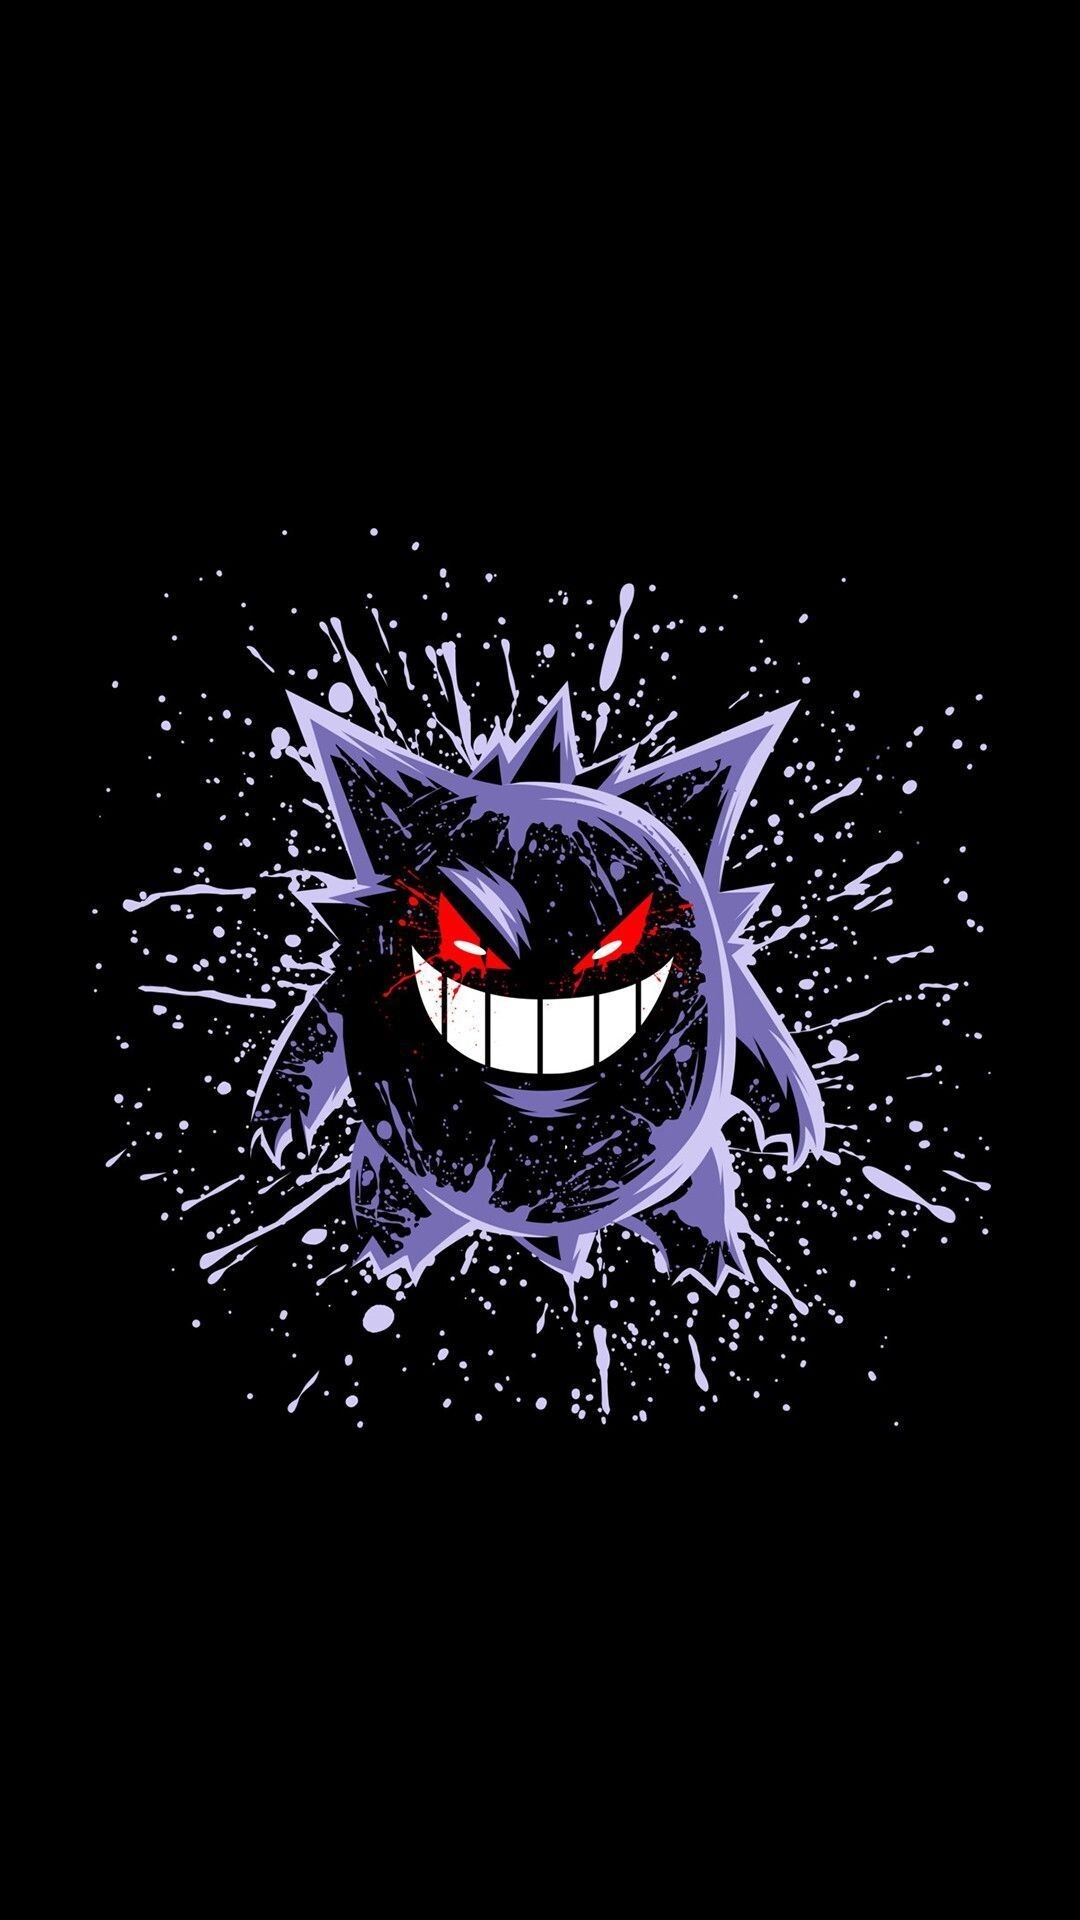 Ghost Pokemon: Gengar, enjoys following victims in the shadows and mimicking them. 1080x1920 Full HD Wallpaper.